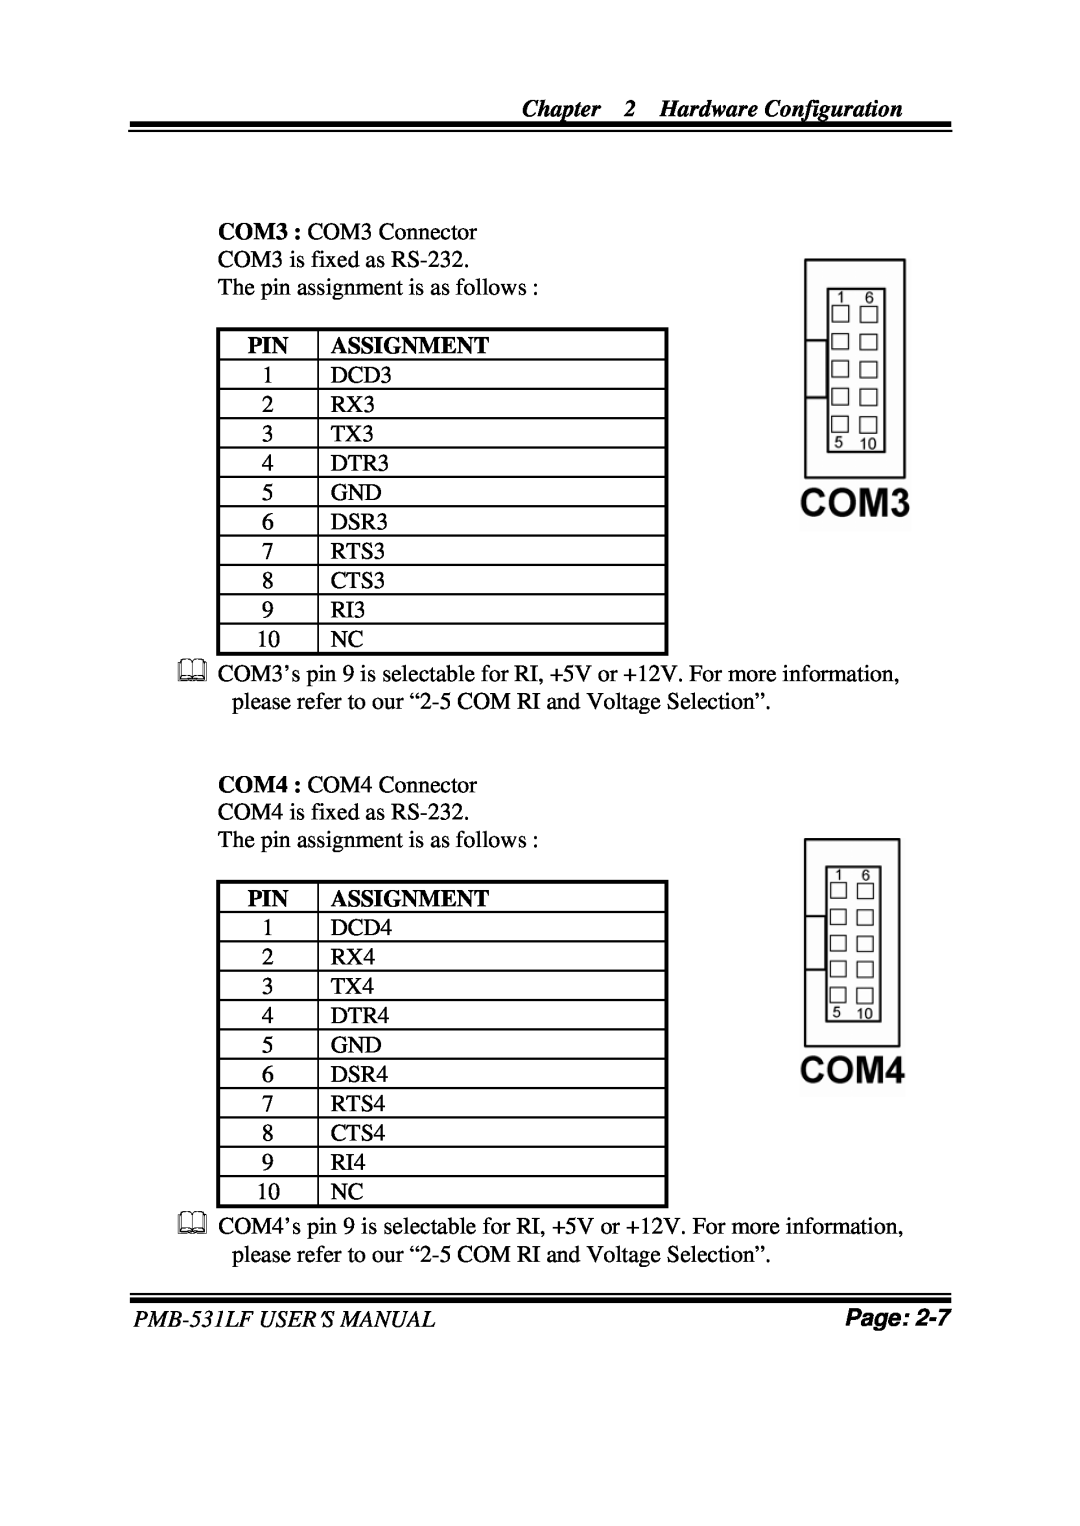 Intel user manual Hardware Configuration, Assignment, PMB-531LFUSER′S MANUAL, Page 